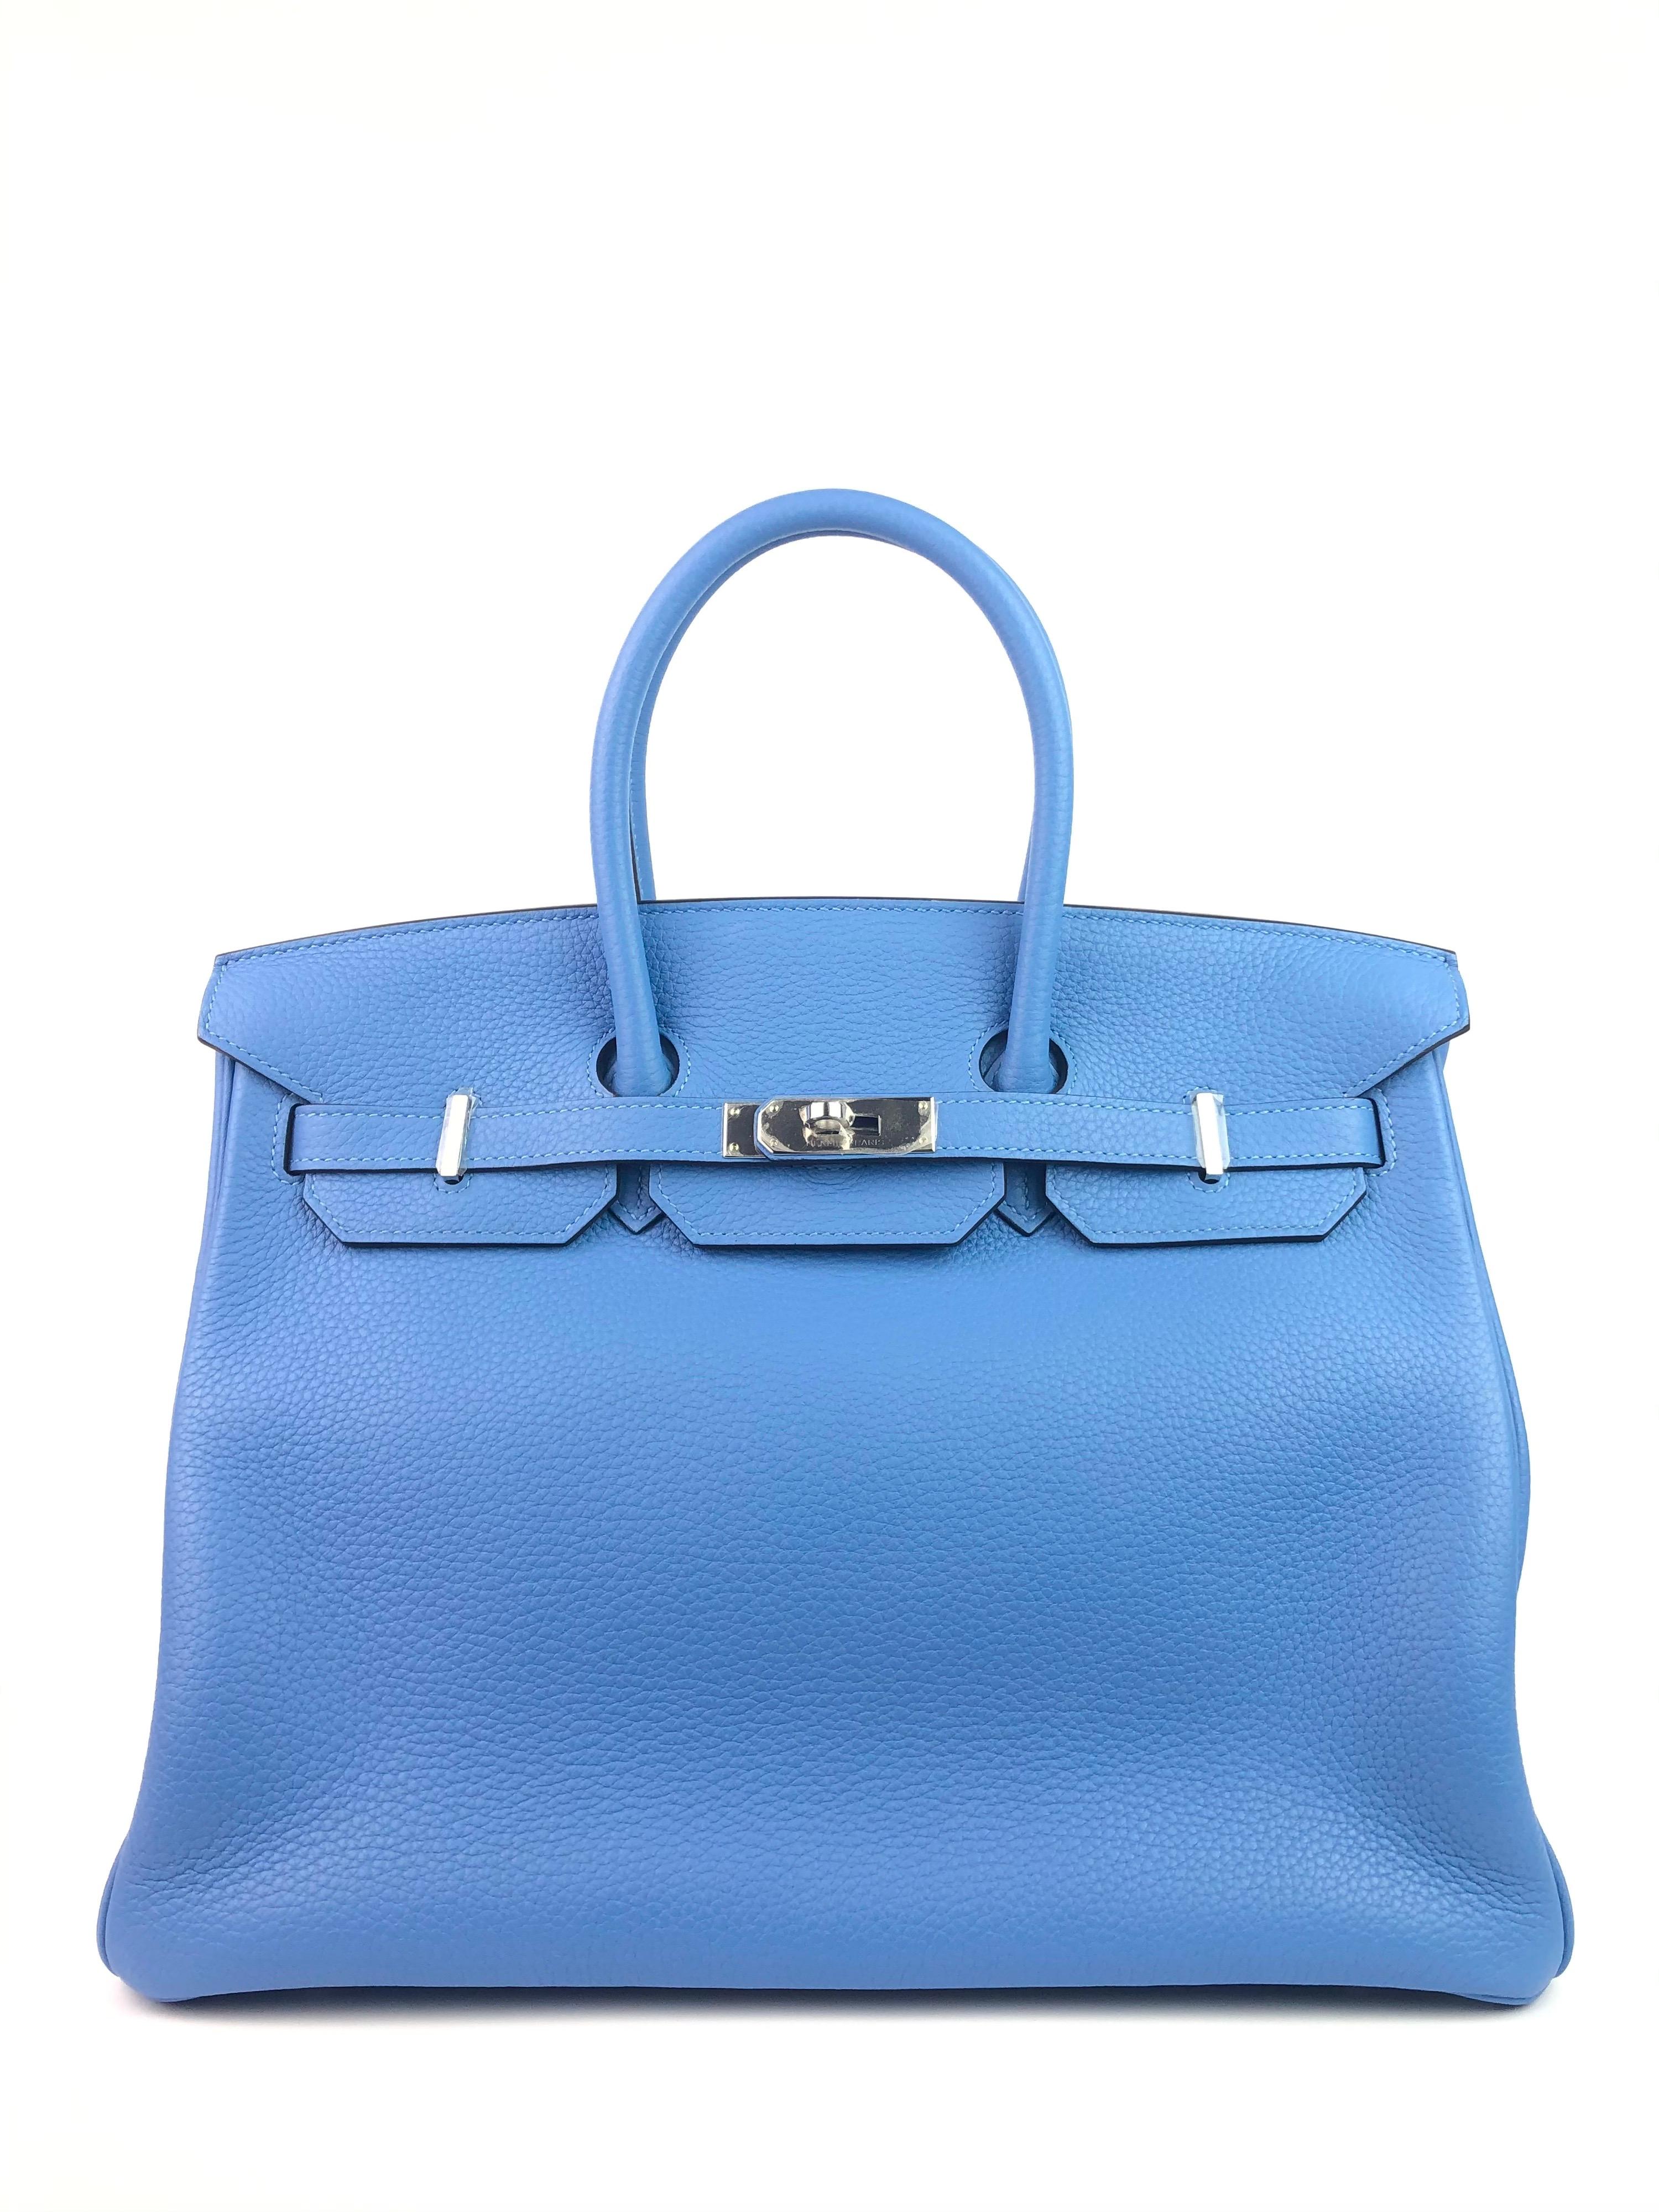 RARE HERMES BIRKIN 35 BLUE PARADISE PALLADIUM  HARDWARE. Almost Like New with all Plastic on hardware and feet excellent corners and structure. R Stamp 2014.

Shop with Confidence from Lux Addicts. Authenticity Guaranteed!